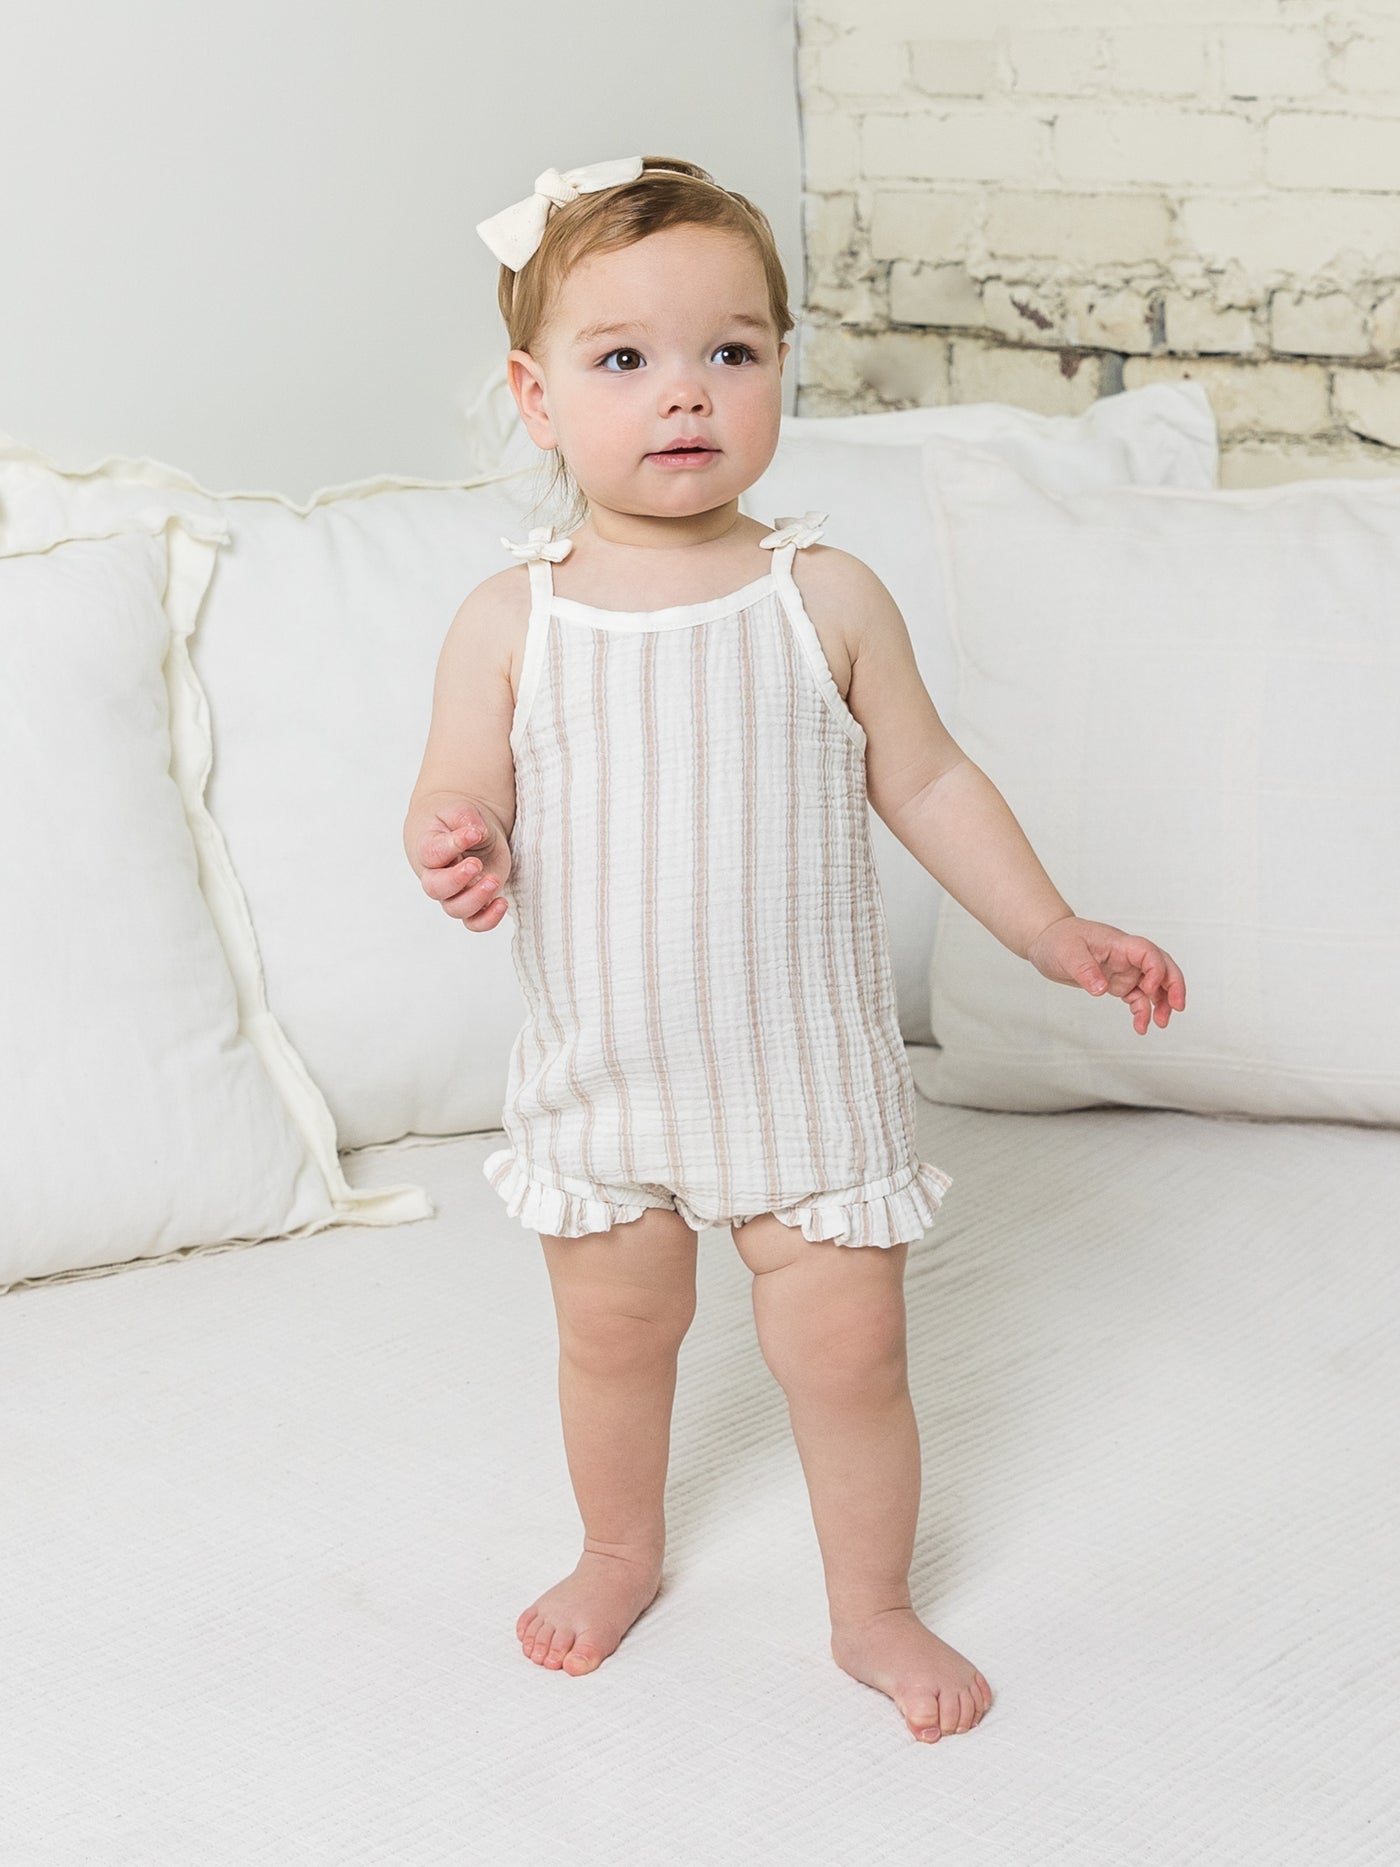 ada ruffle tank romper by colored organics - The cutest bubble romper is here just in time for warmer weather! To keep getting dressed easy, the romper has an adorable wooden button keyhole closure, faux bows, and snap closures on the bottom. 100% organic cotton muslin